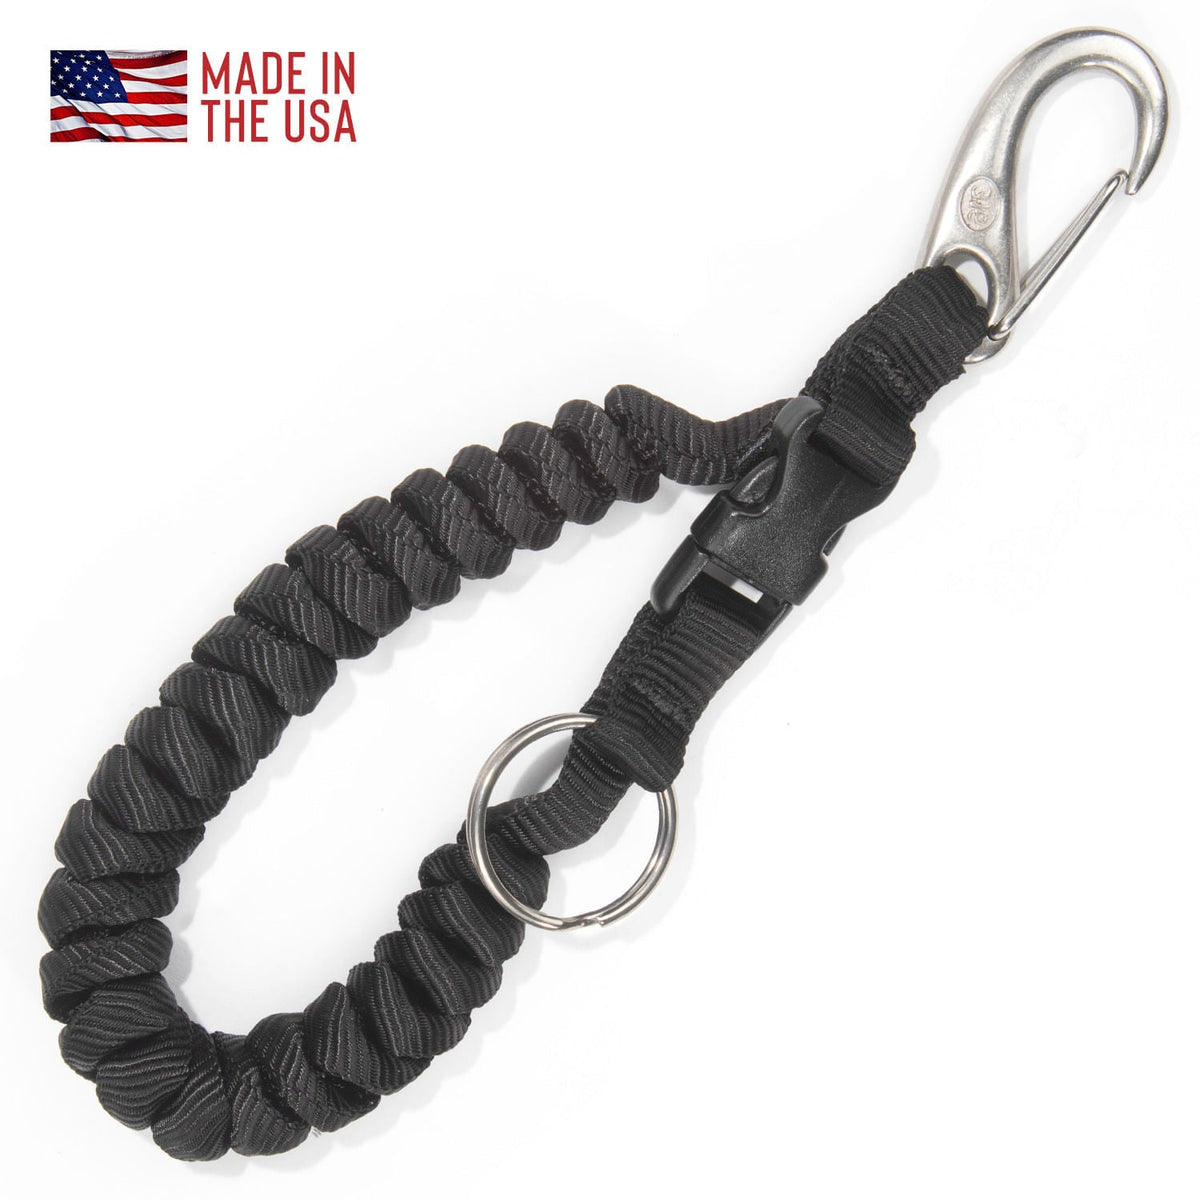 Red Oxx Key Fob Mini Coil Lanyard - 305320 Cord with Clasp